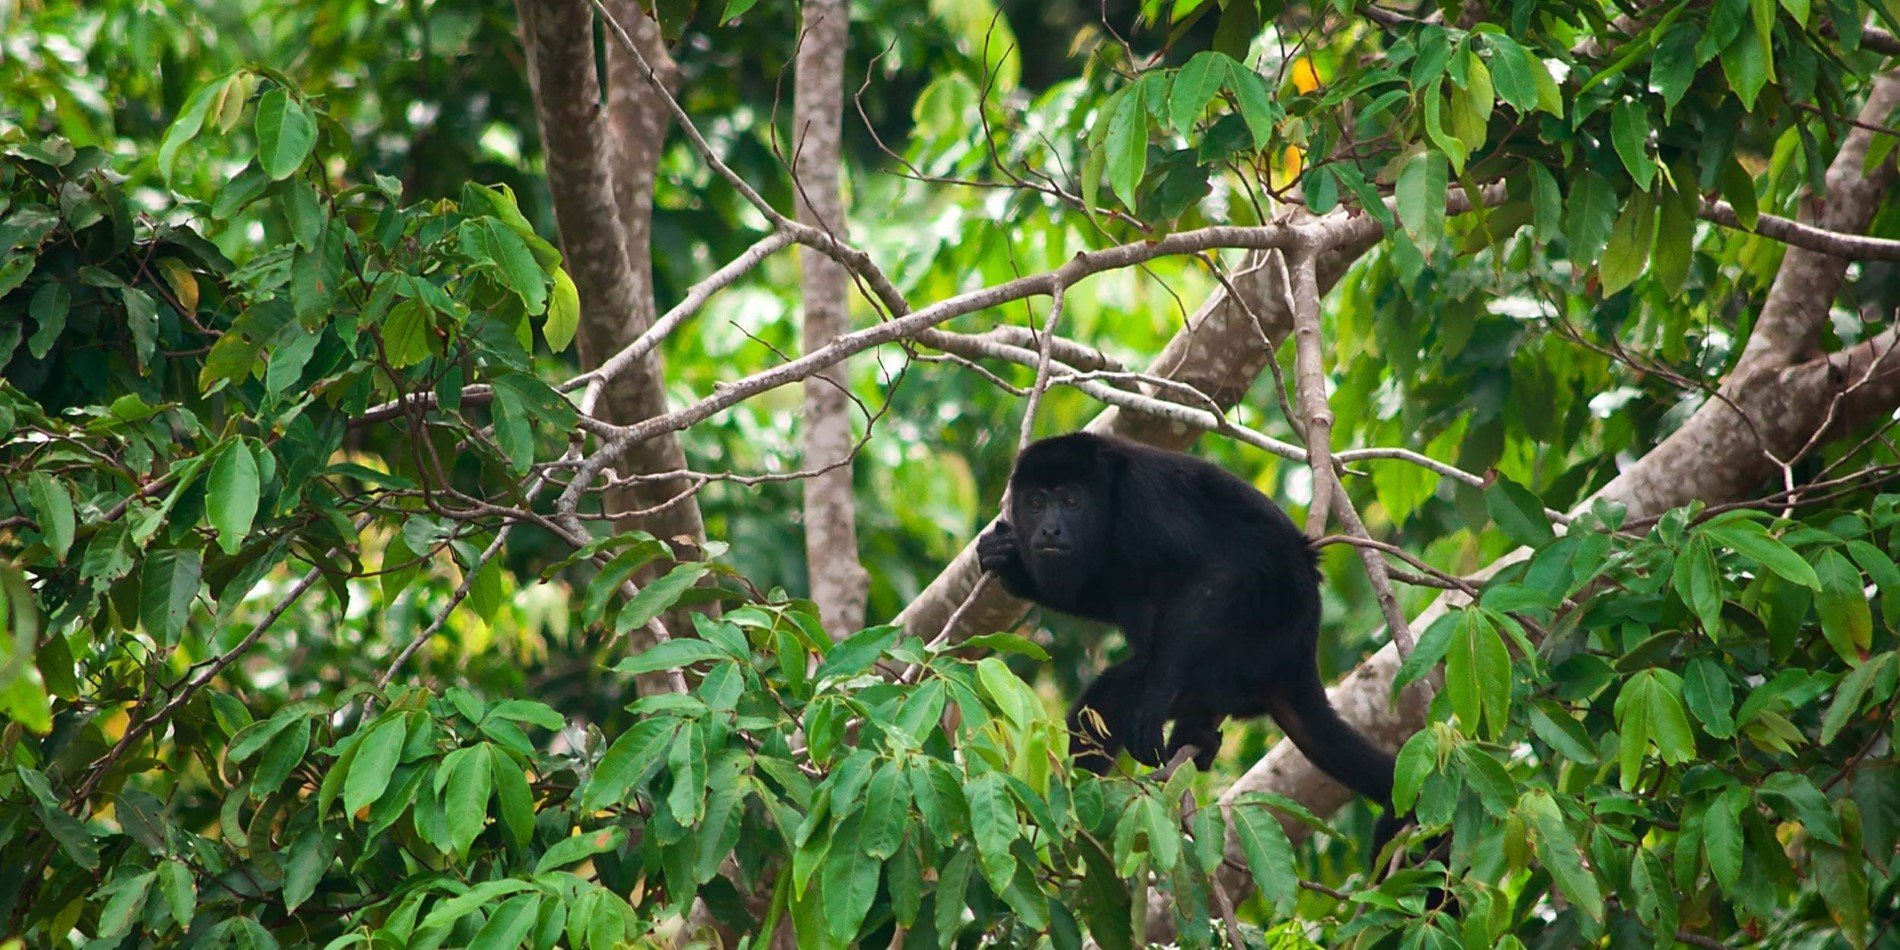 A Howler monkey doing his thing